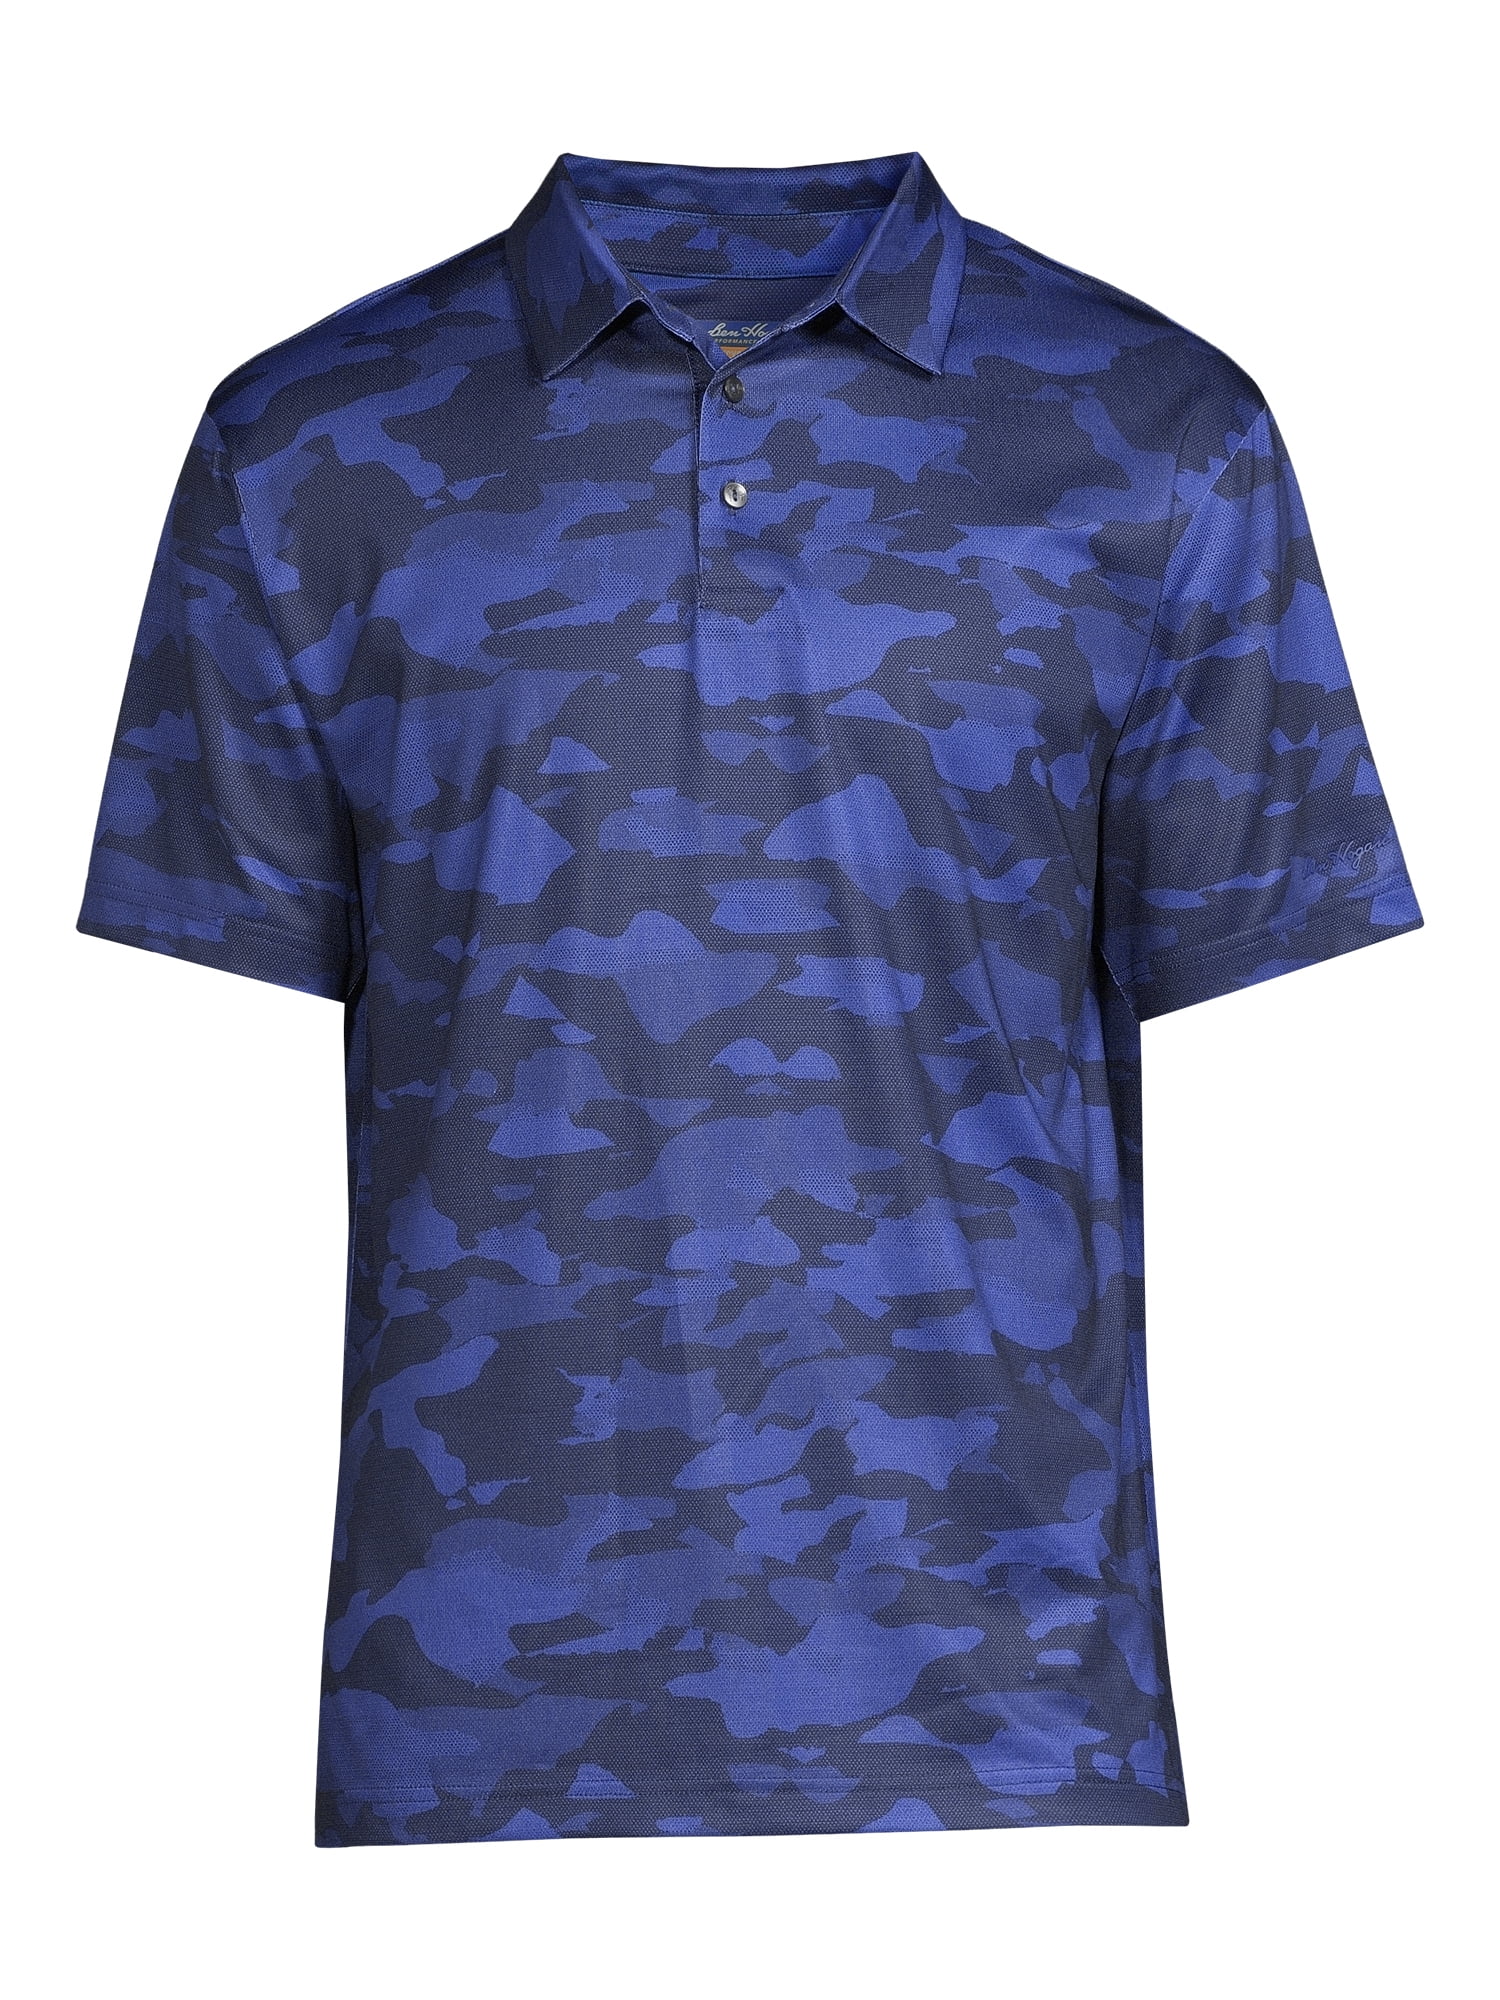 Ben Men's and Big Men's Camouflage Golf Polo Shirt with Short Sleeves, Sizes S-5XL - Walmart.com